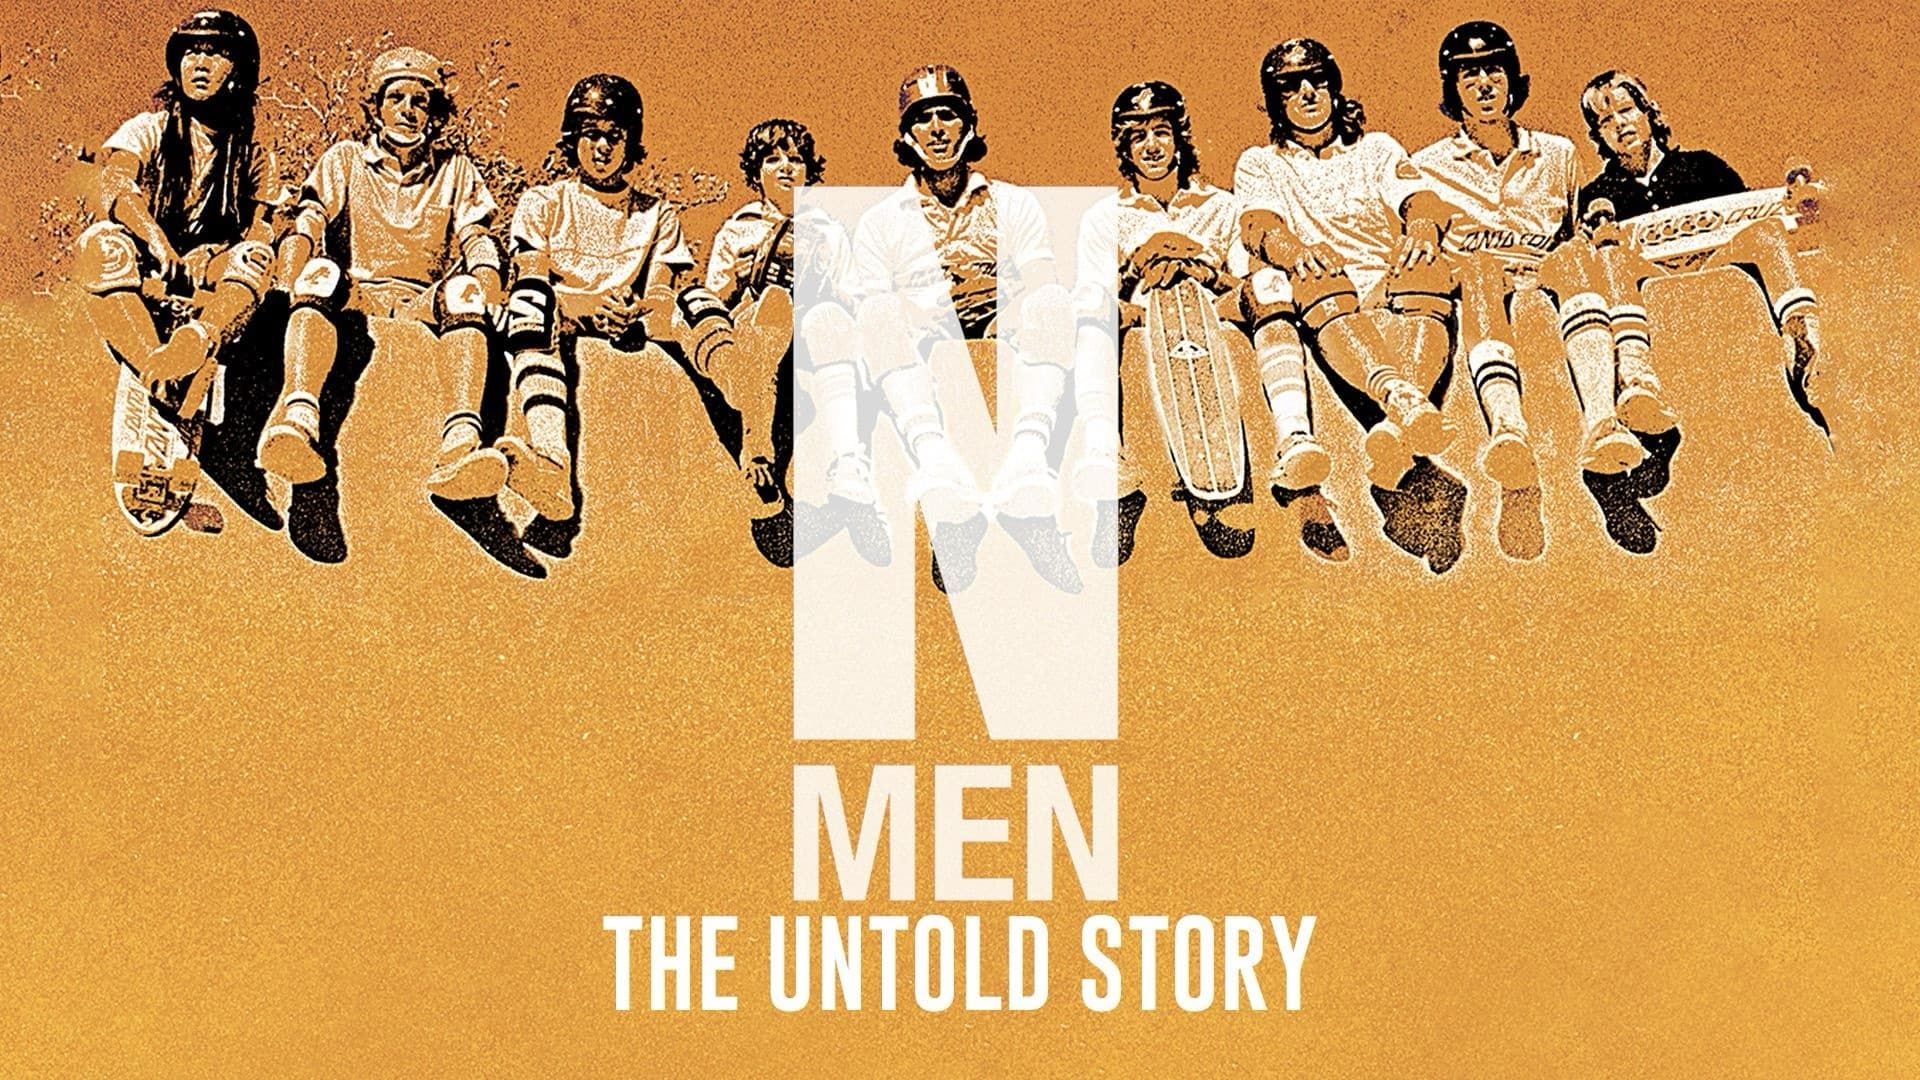 N-Men: The Untold Story background